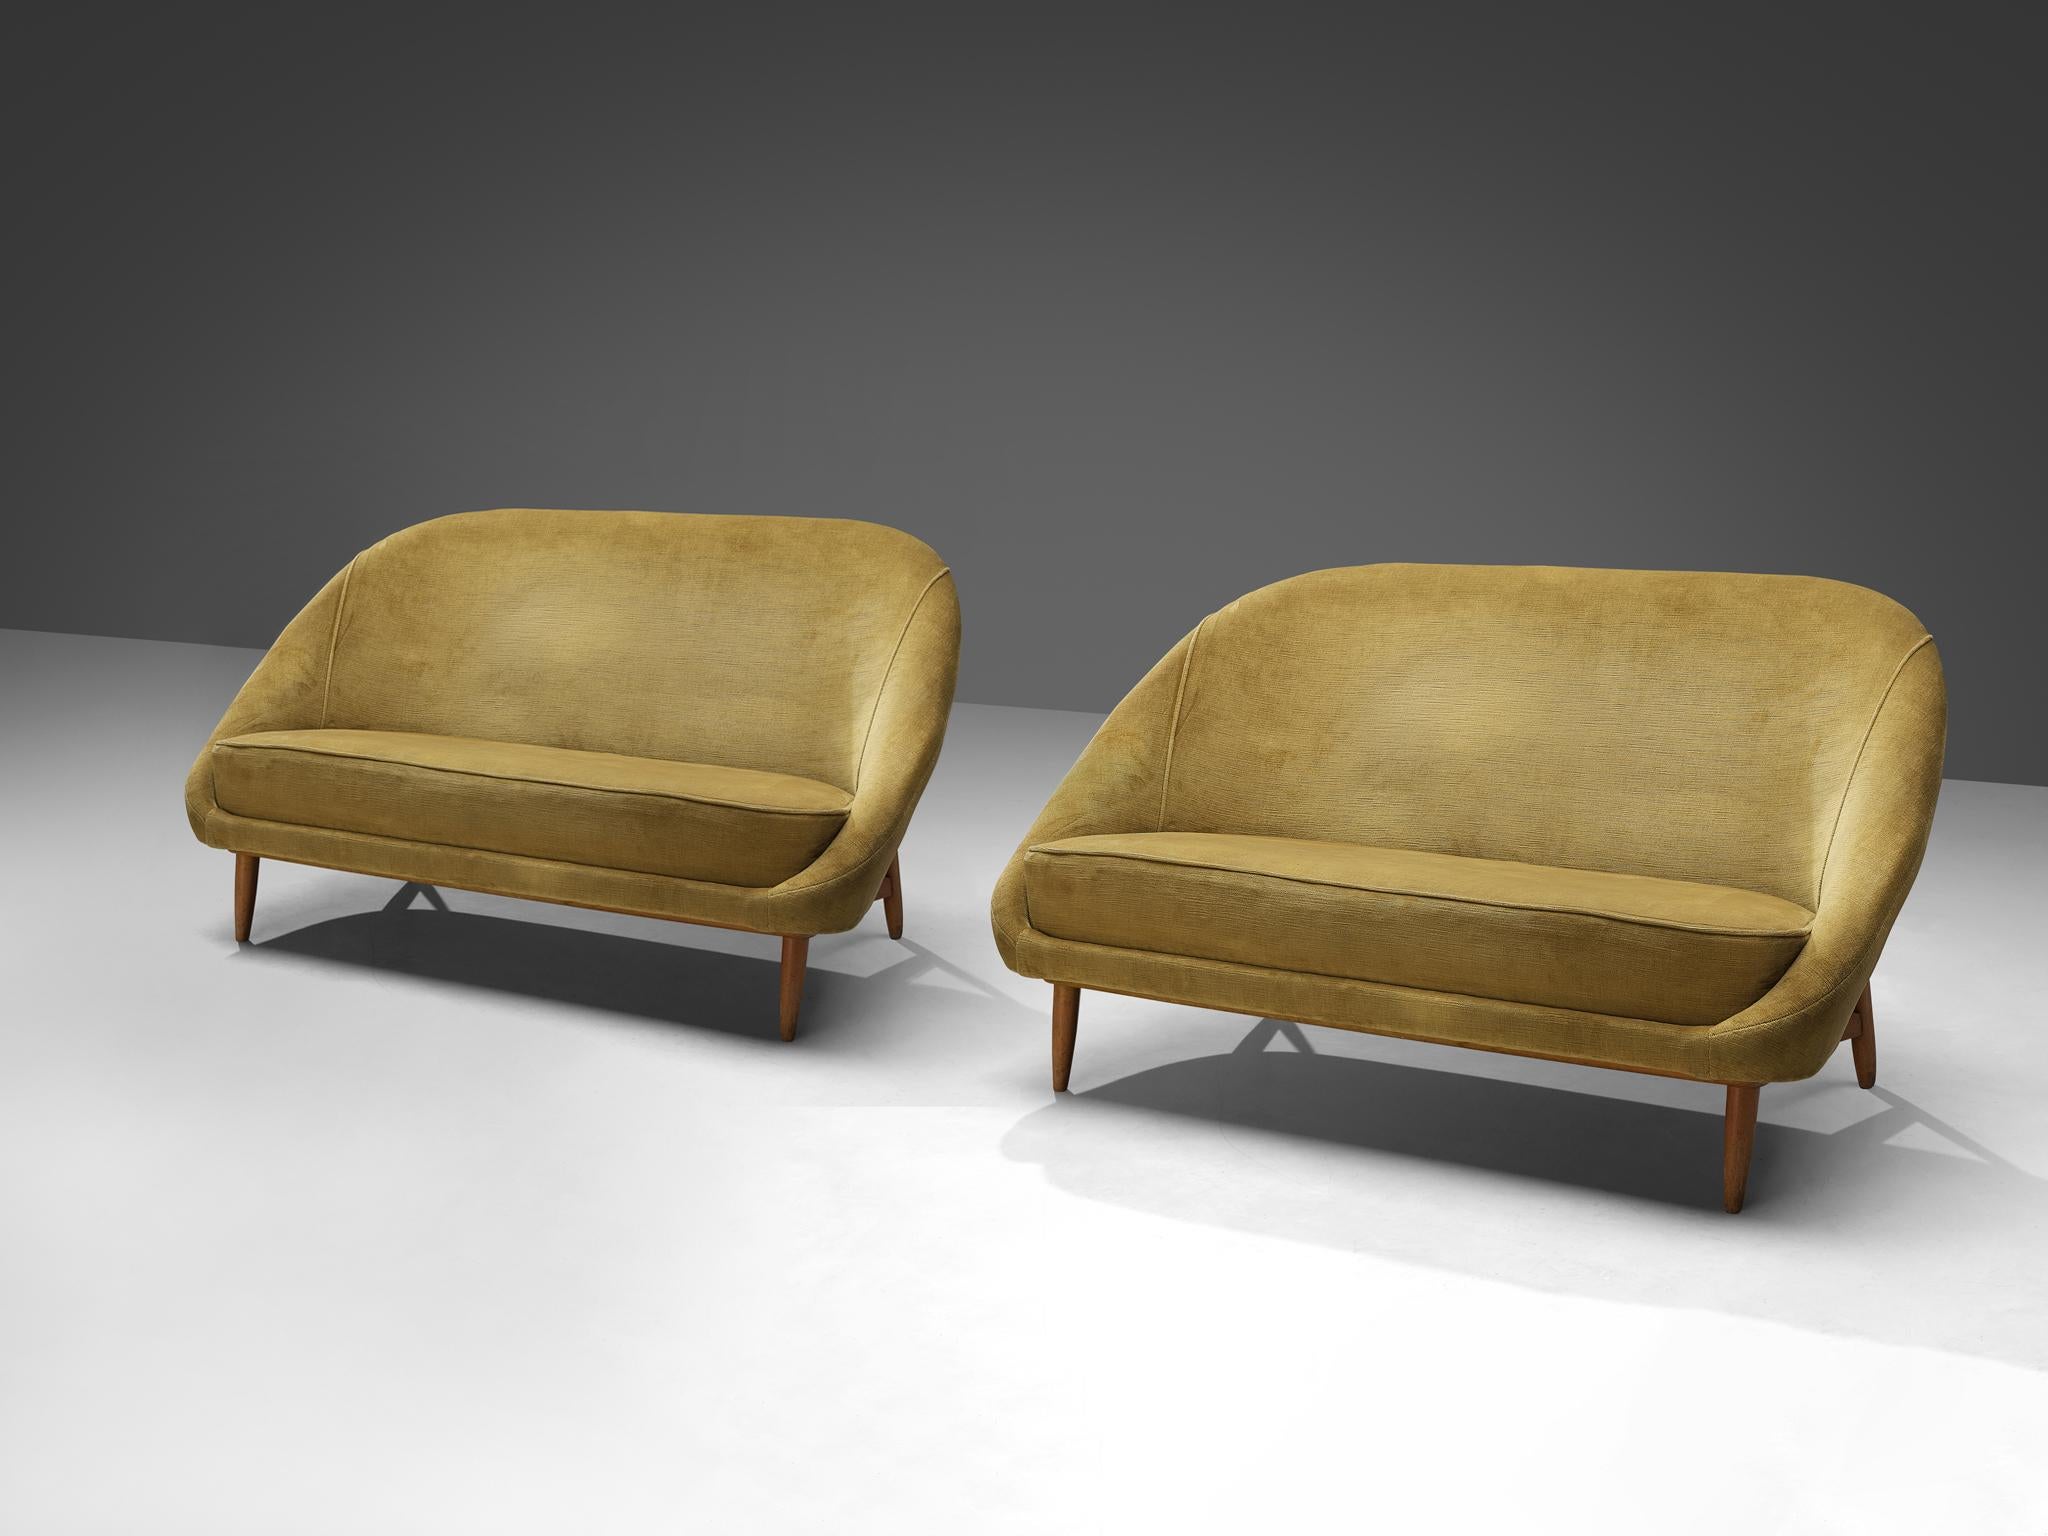 Theo Ruth for Artifort, sofa model '115', fabric, wood, Netherlands, 1950s

Dutch settees by Theo Ruth currently upholstered in a yellow velvet. The back of these sofas tilts slightly backwards and has the recognizable natural flow and feel of